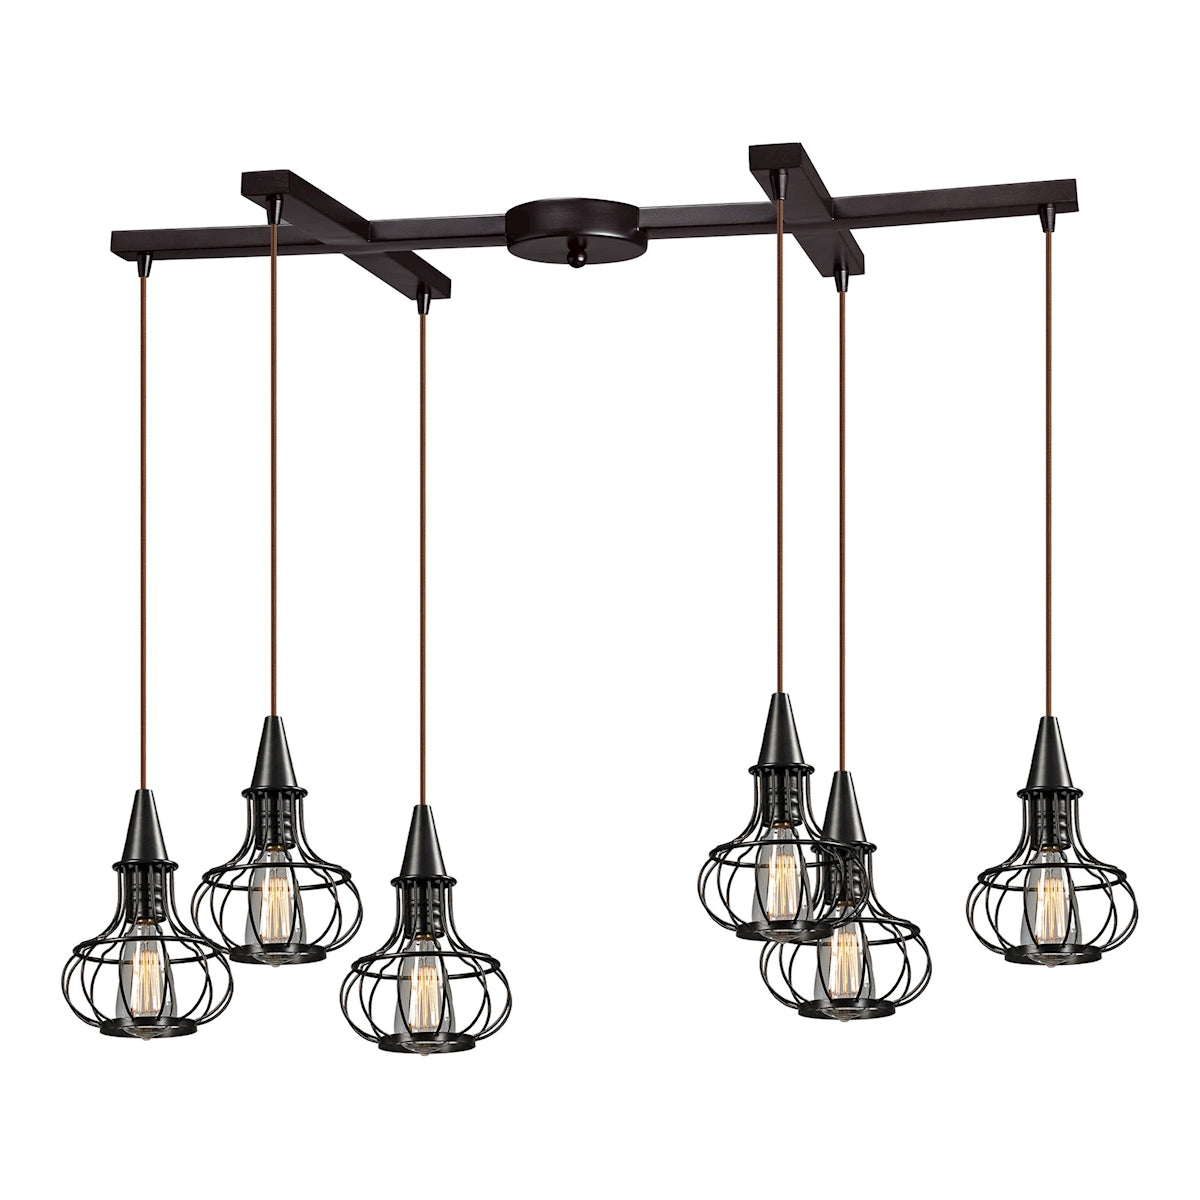 ELK Lighting 14191/6 Yardley 6-Light H-Bar Pendant Fixture in Oil Rubbed Bronze with Wire Cages